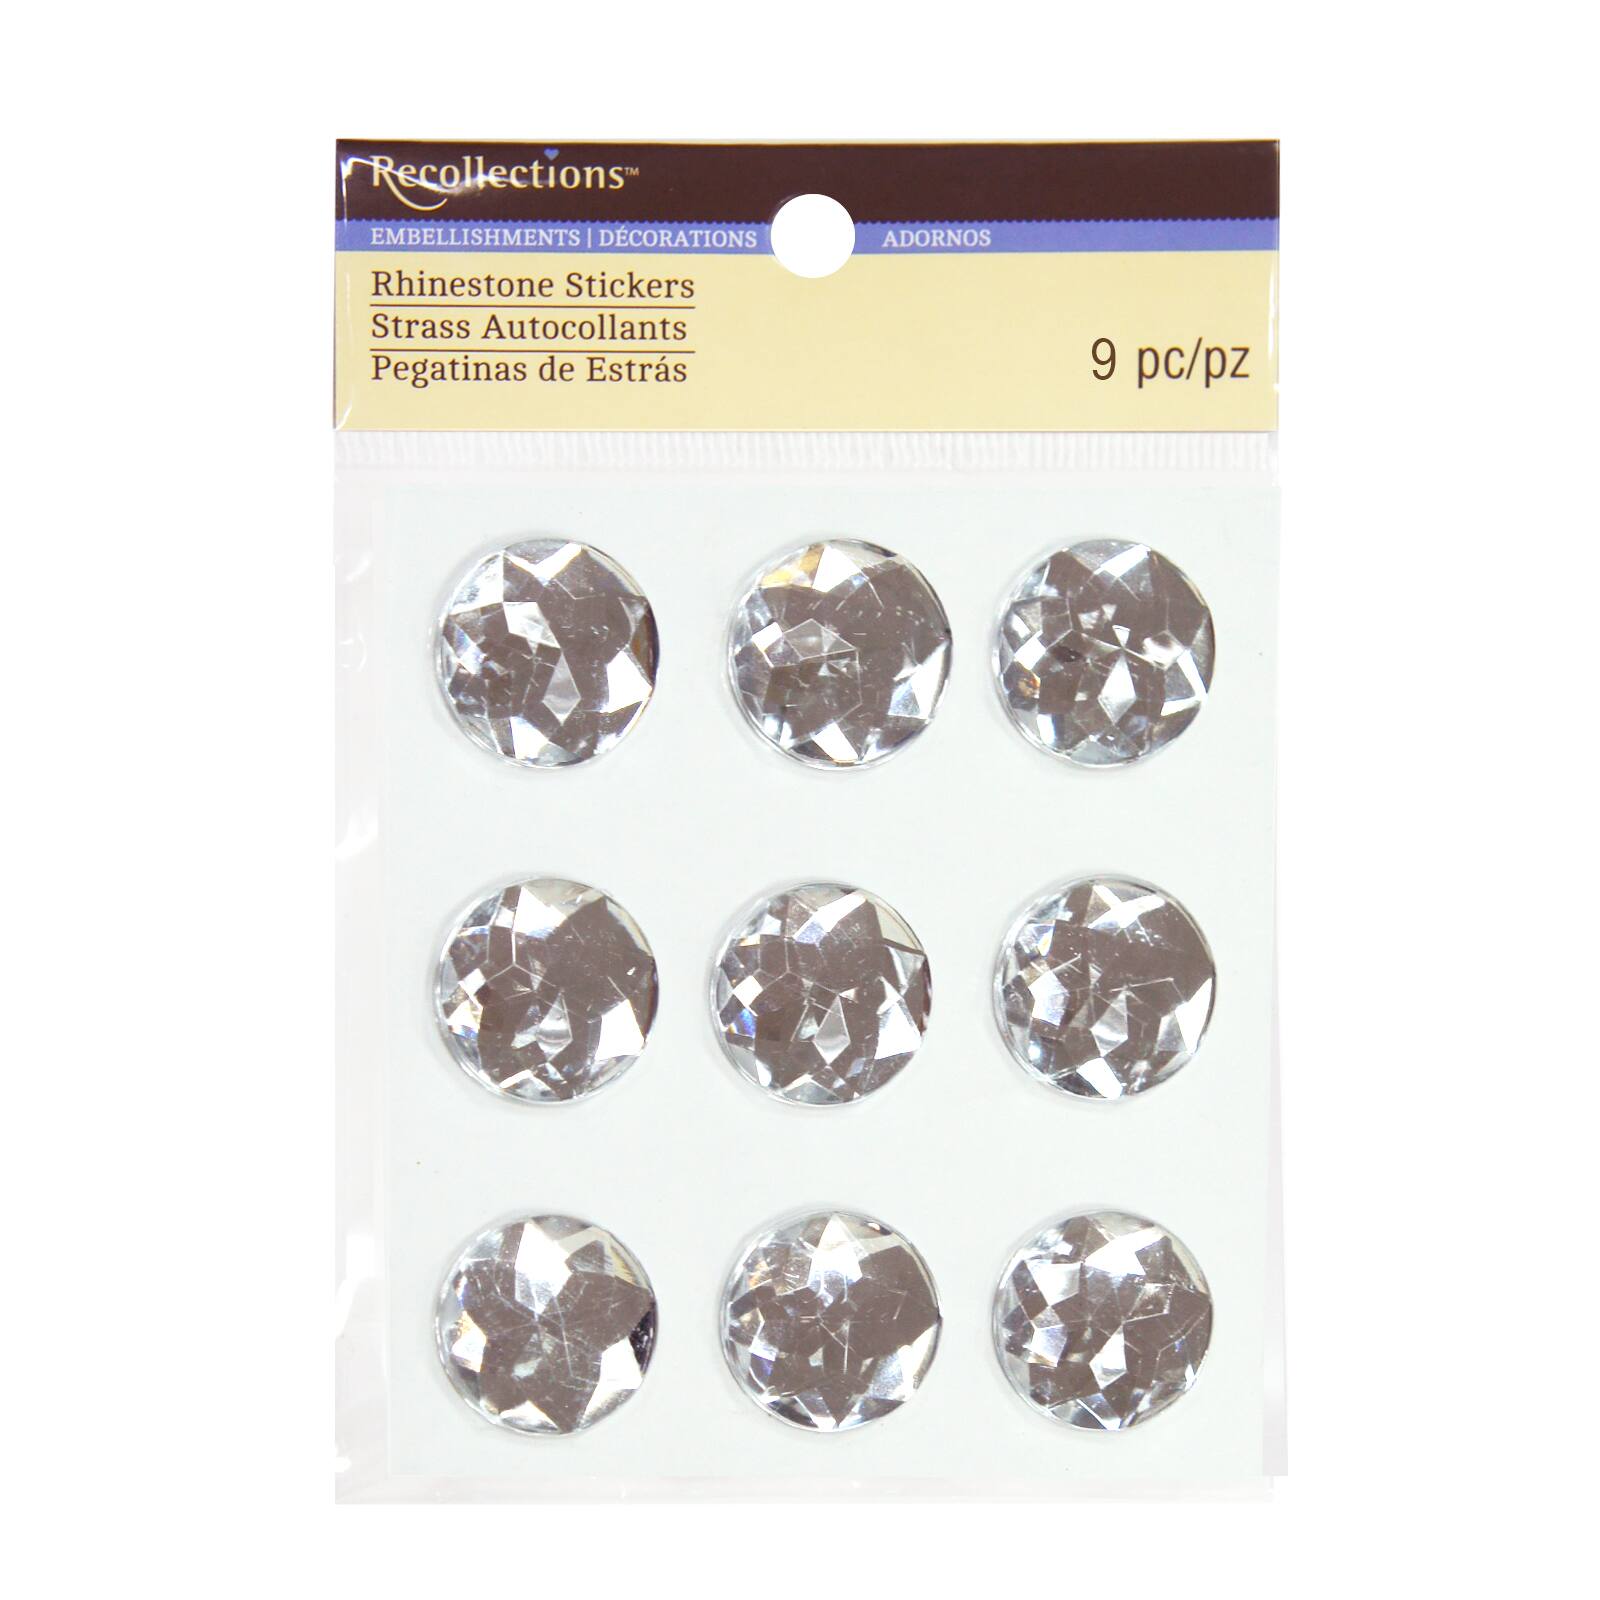 Shop for the Clear Round Rhinestone Stickers by Recollections™ at Michaels